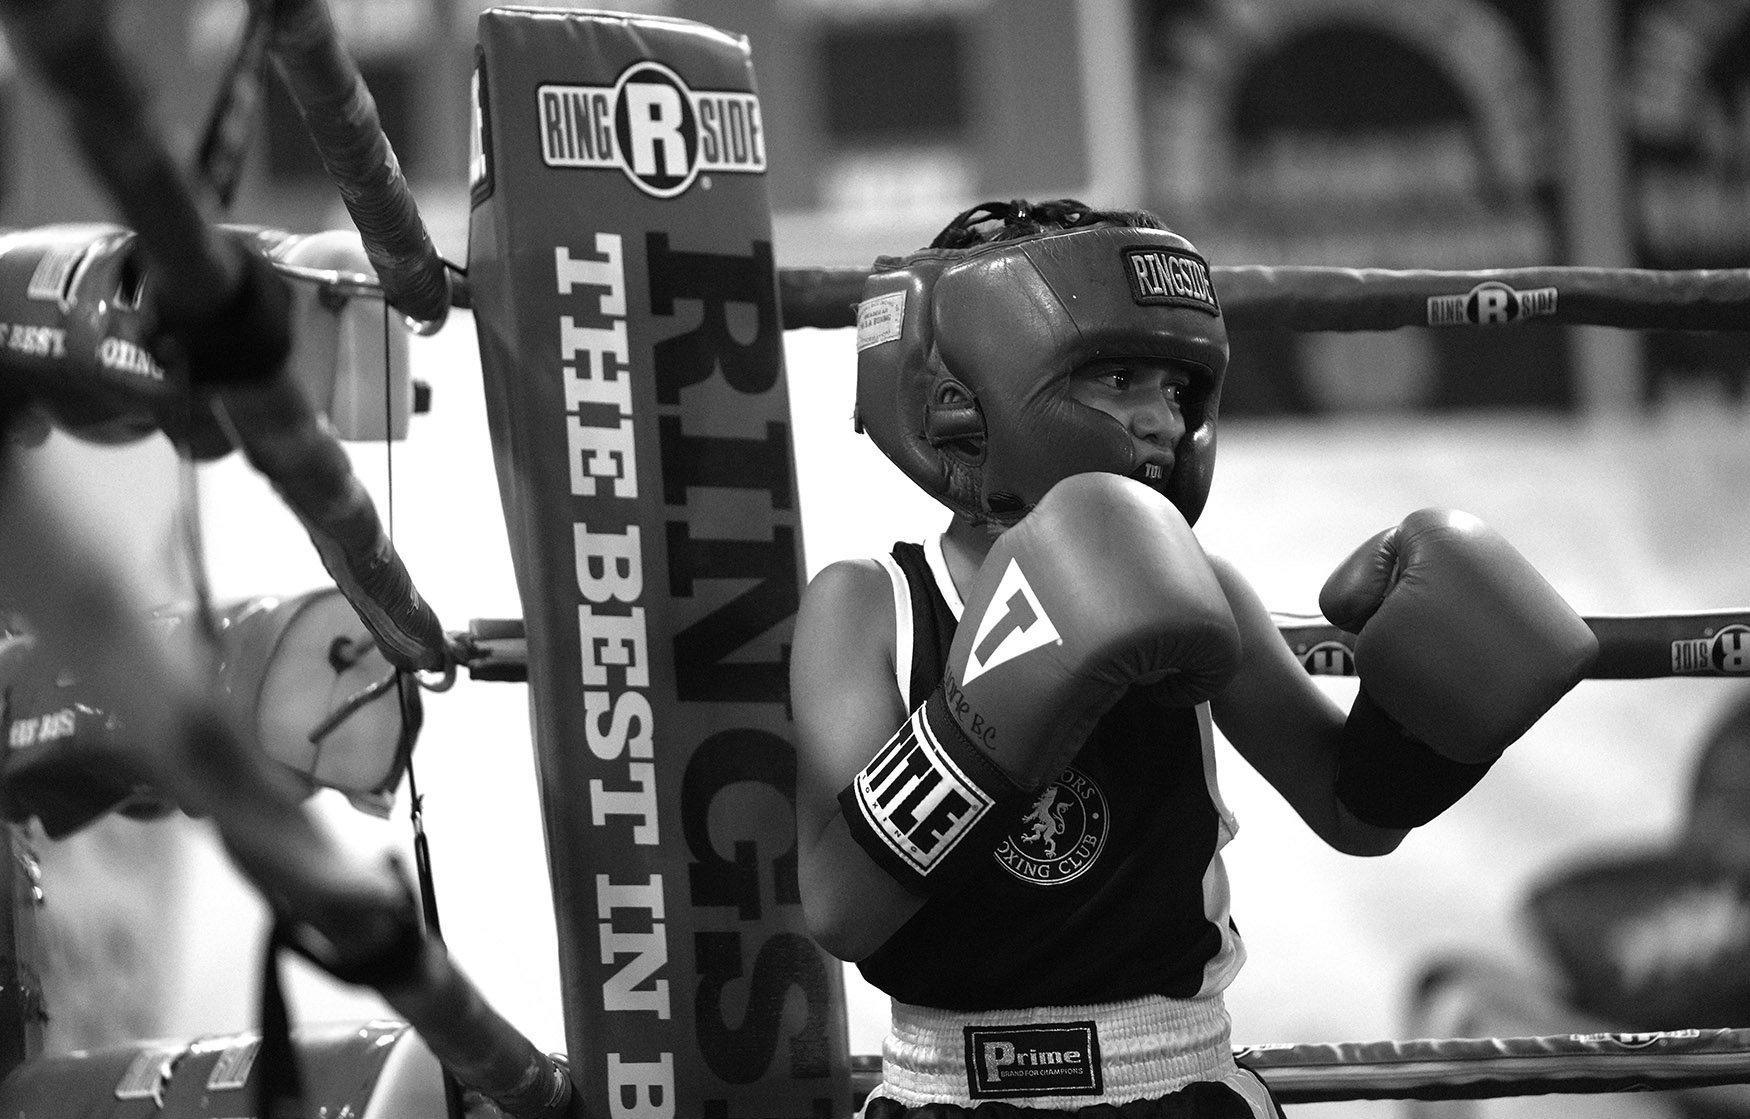  Nine year-old Joseph Hernandez of GBC Boxing prepares to fight nine year-old Daniel Ramies (not pictured) of MTC Boxing during the annual amateur boxing show staged by the Duarte Boxing Club at Duarte High School in Duarte on Saturday, August 13, 20